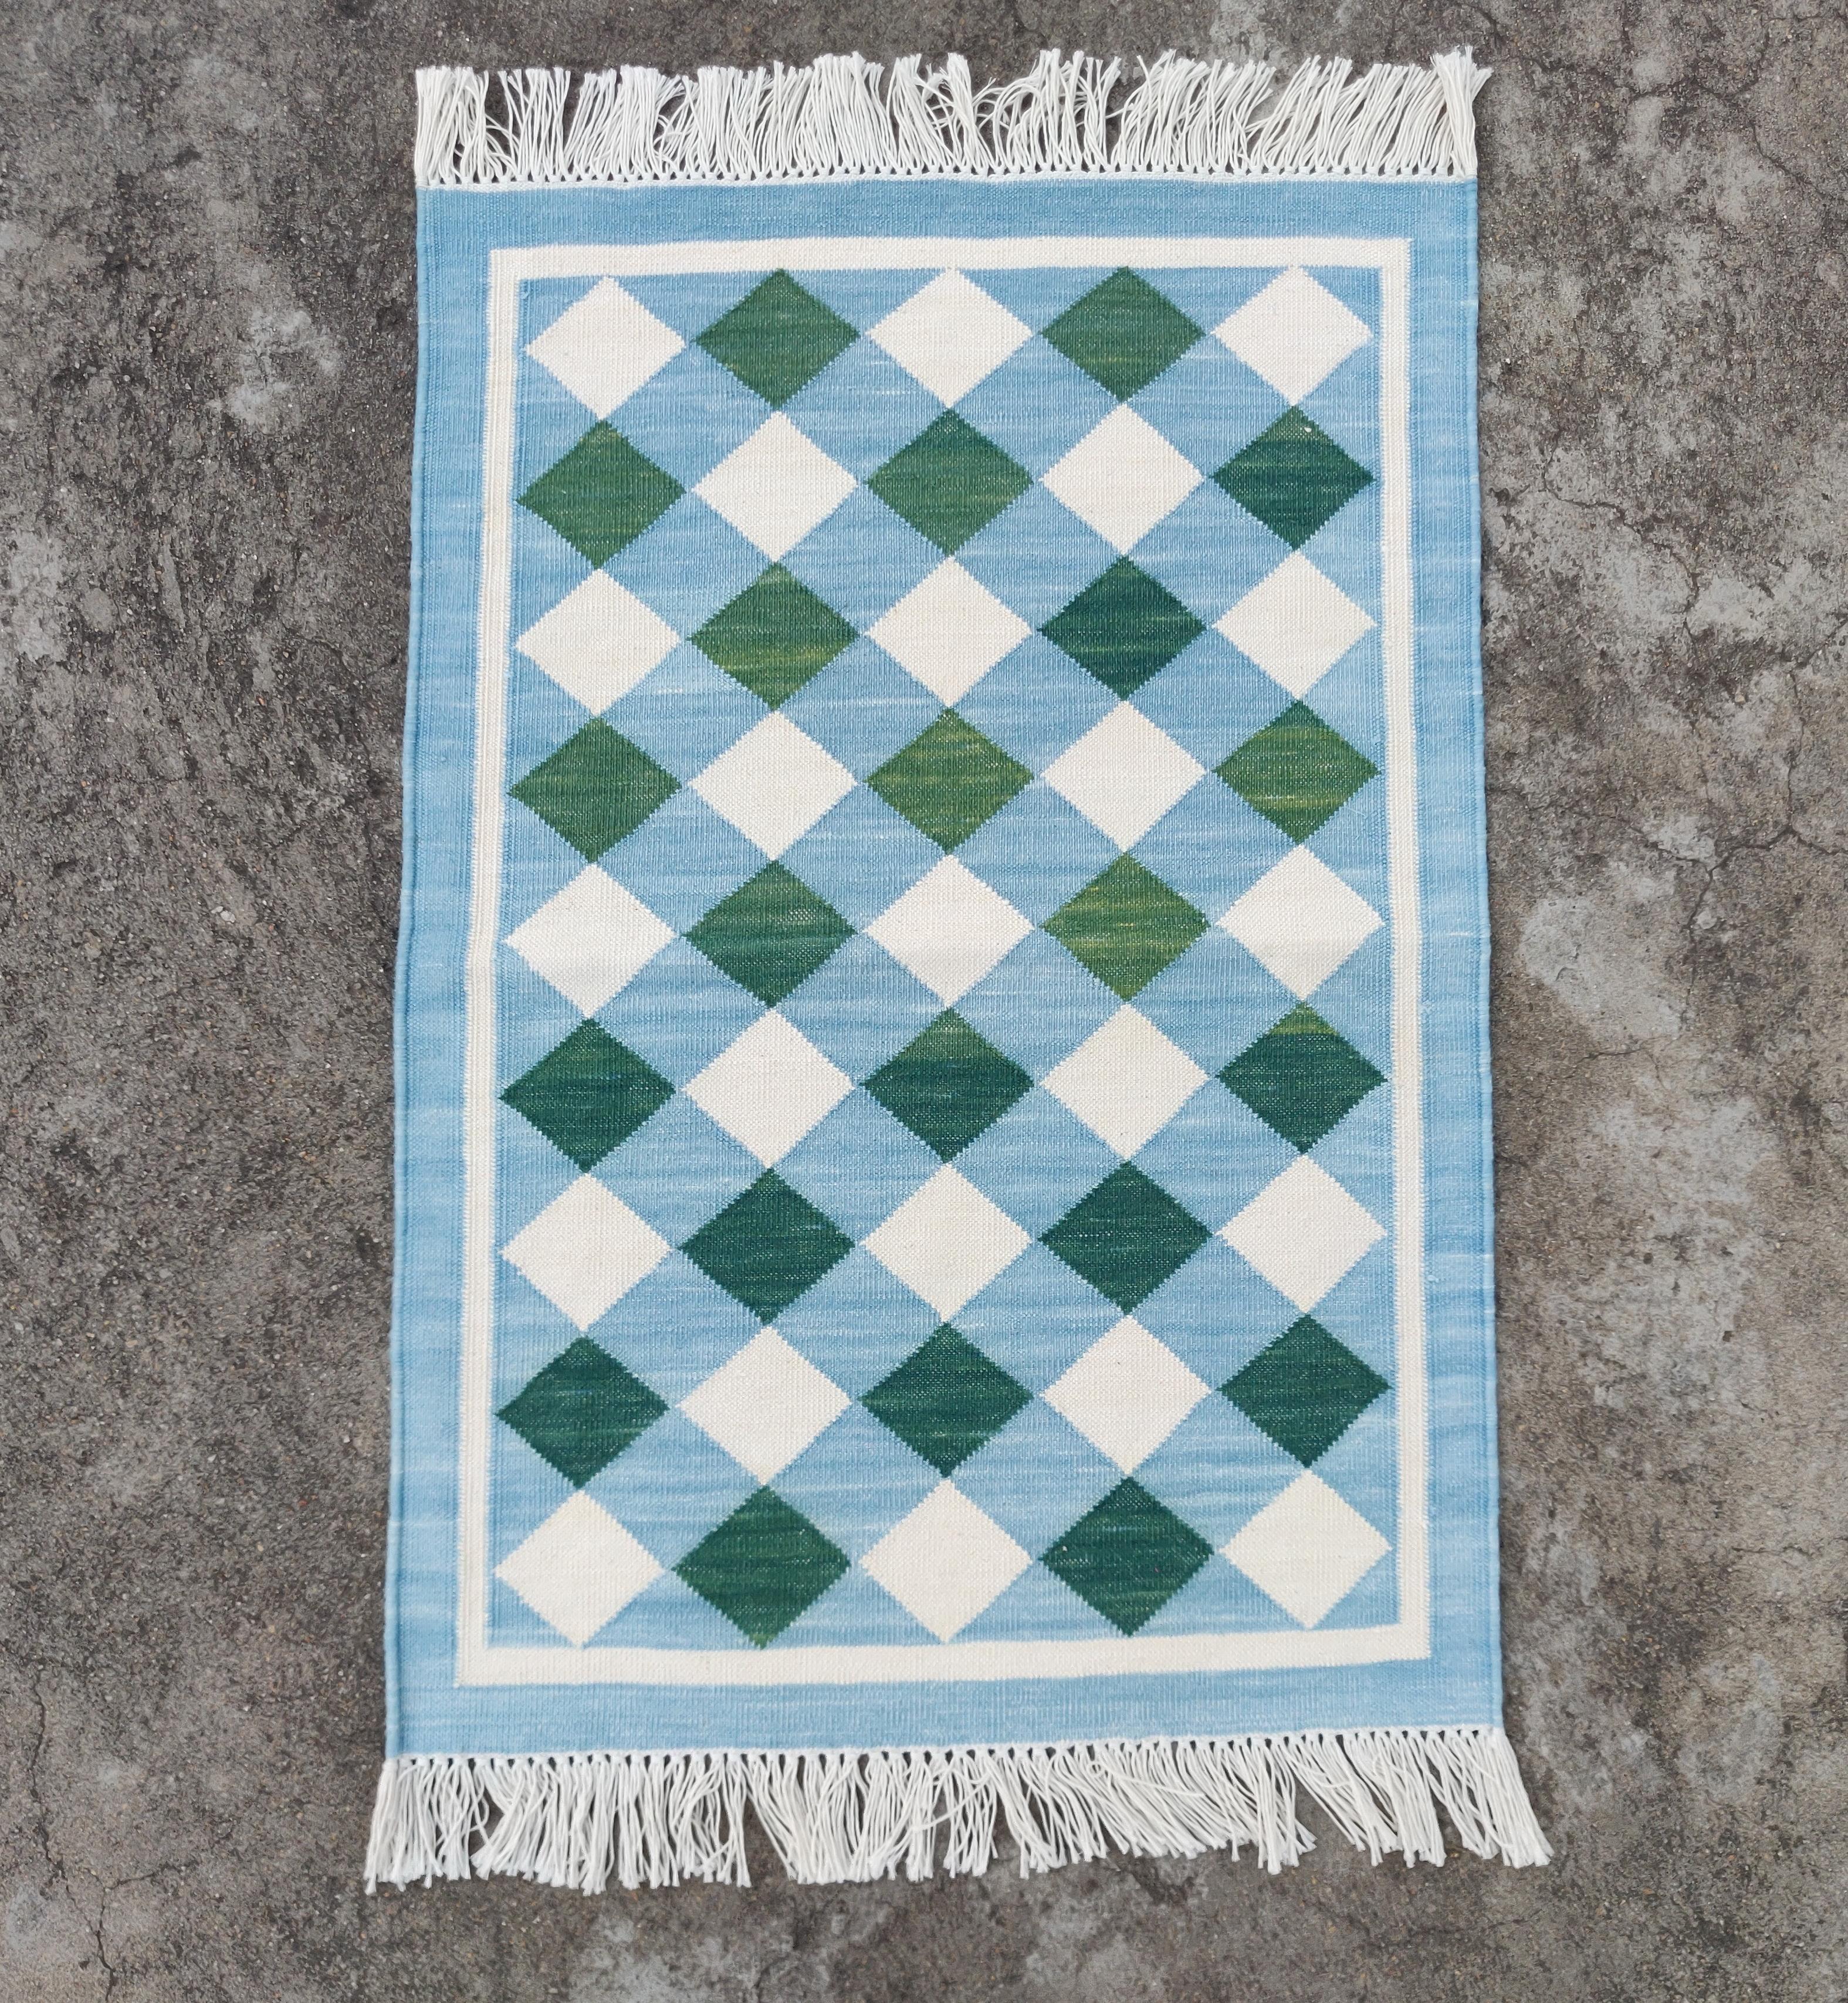 Hand-Woven Handmade Cotton Area Flat Weave Rug, 2x3 Blue And Green Checked Indian Dhurrie For Sale